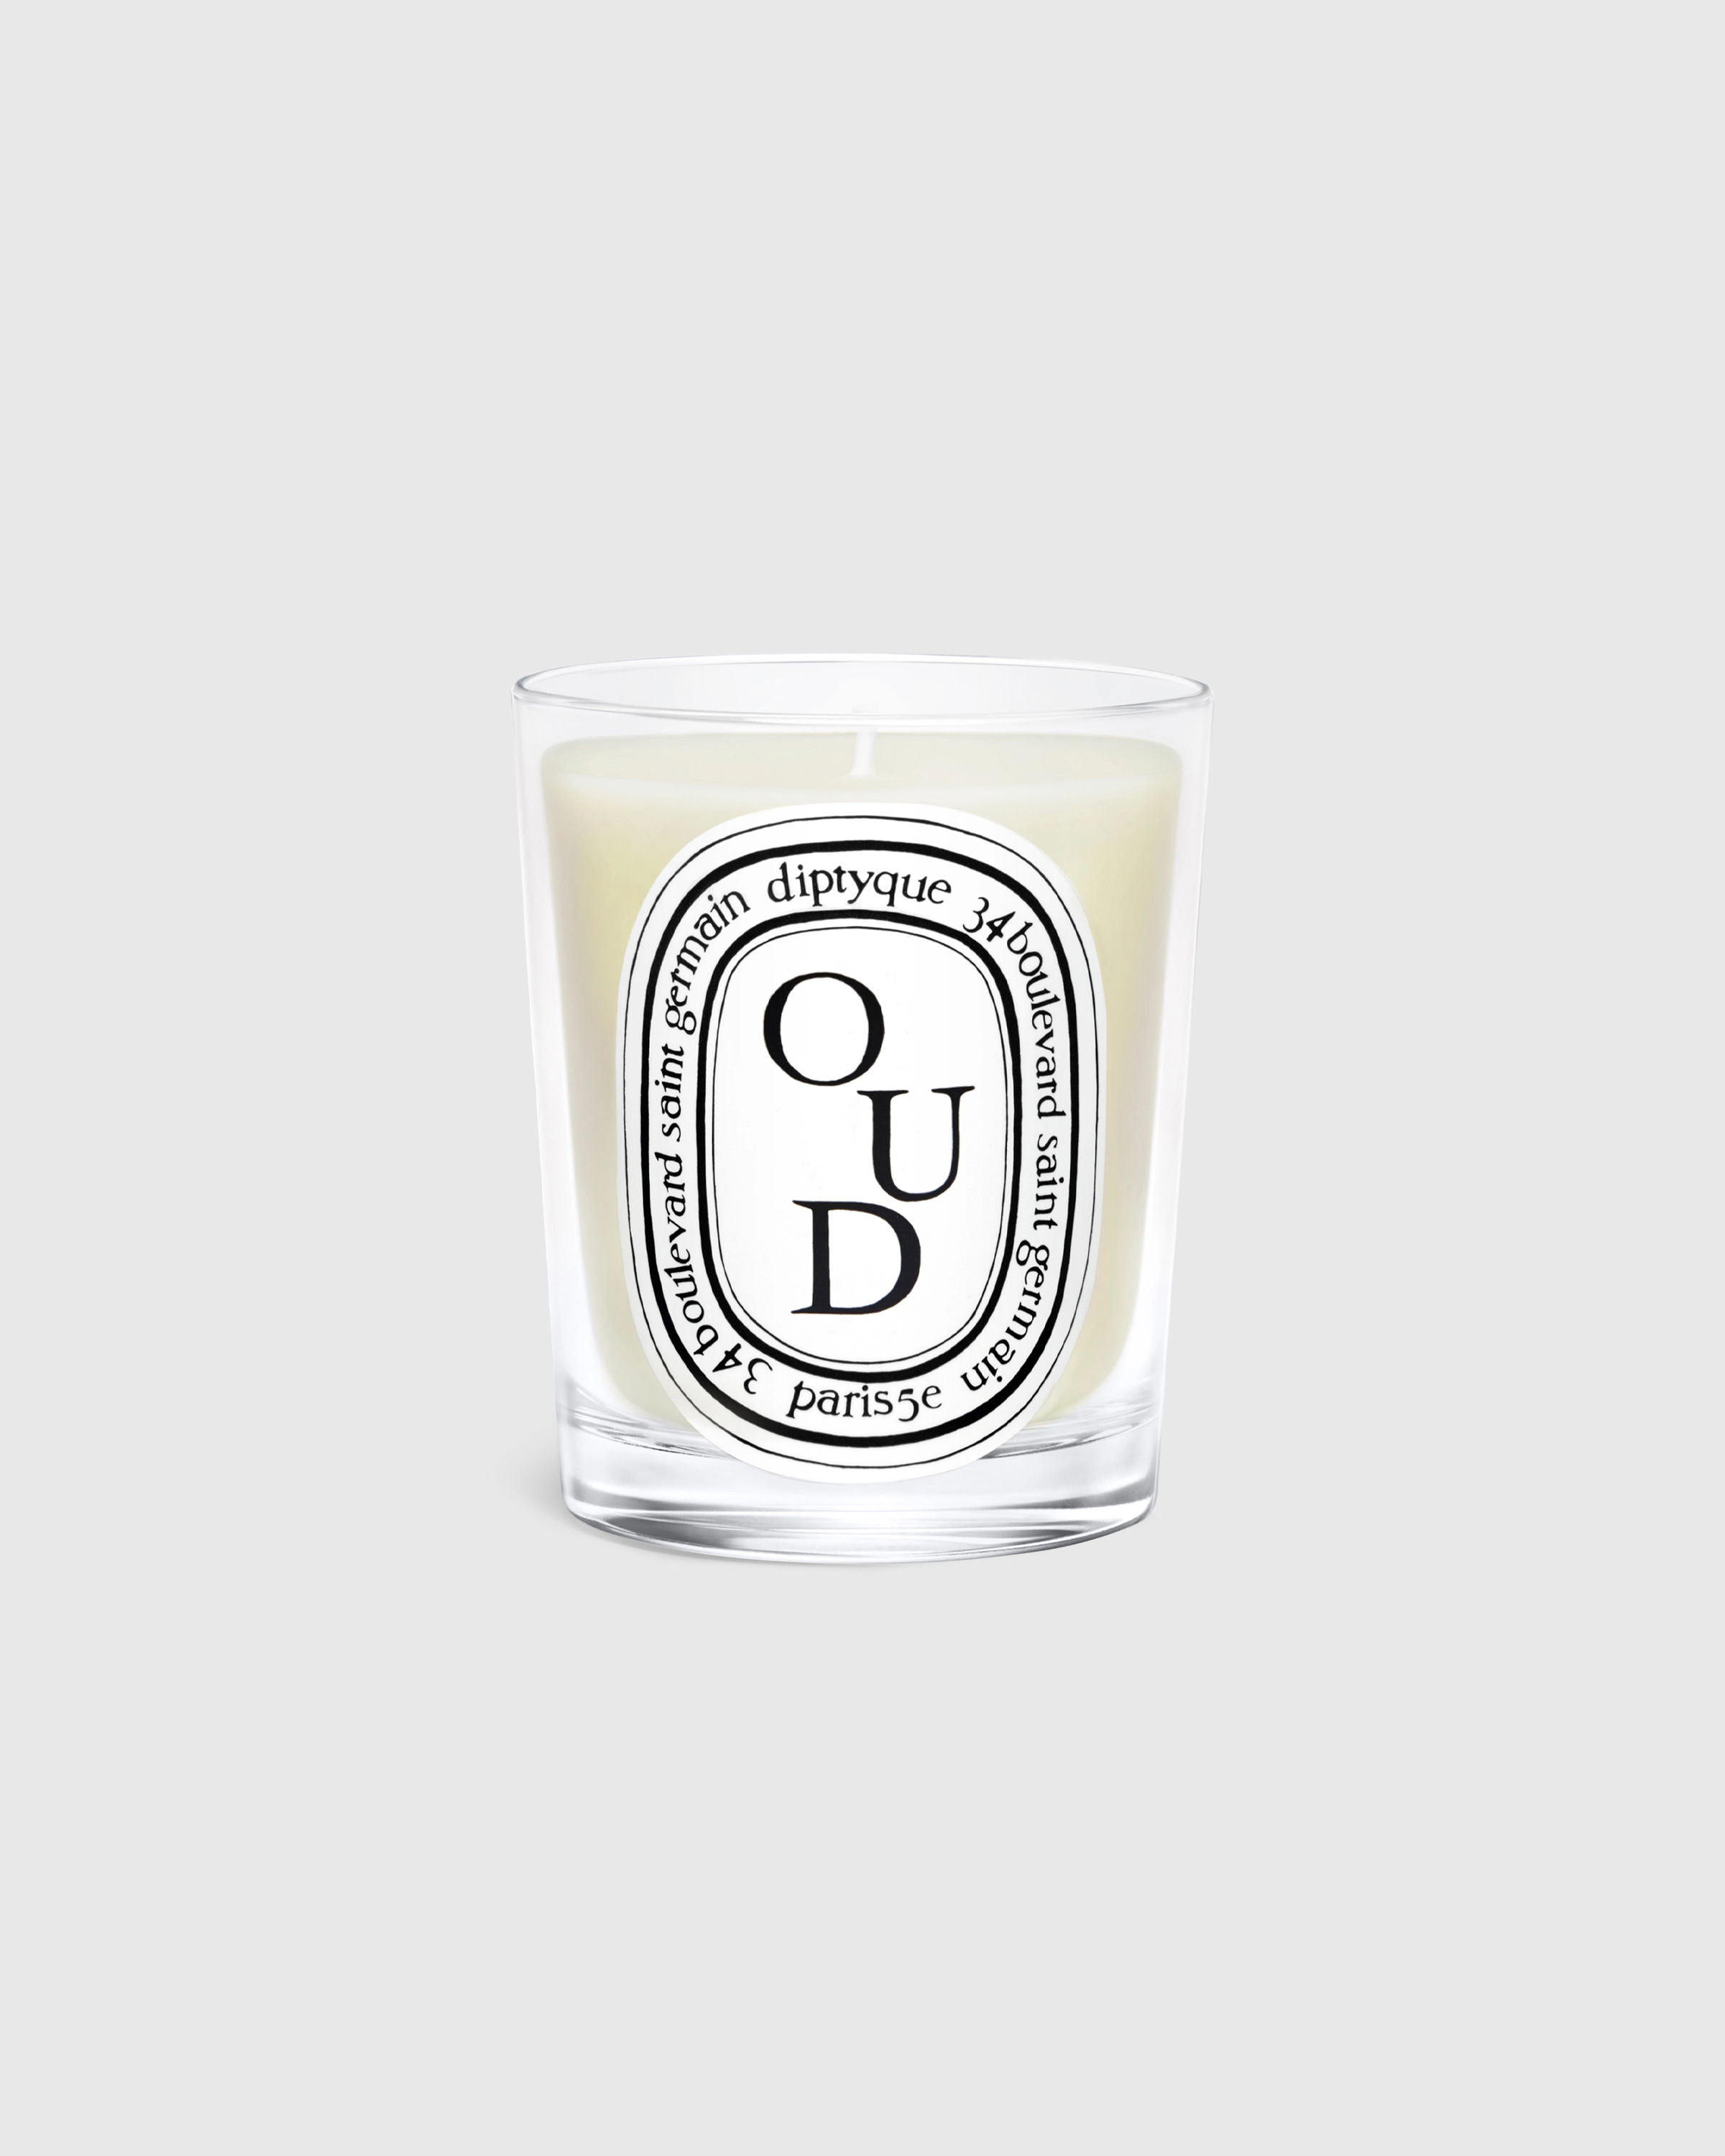 Diptyque – Standard Candle Oud 190g - Candles & Fragrances - White - Image 1